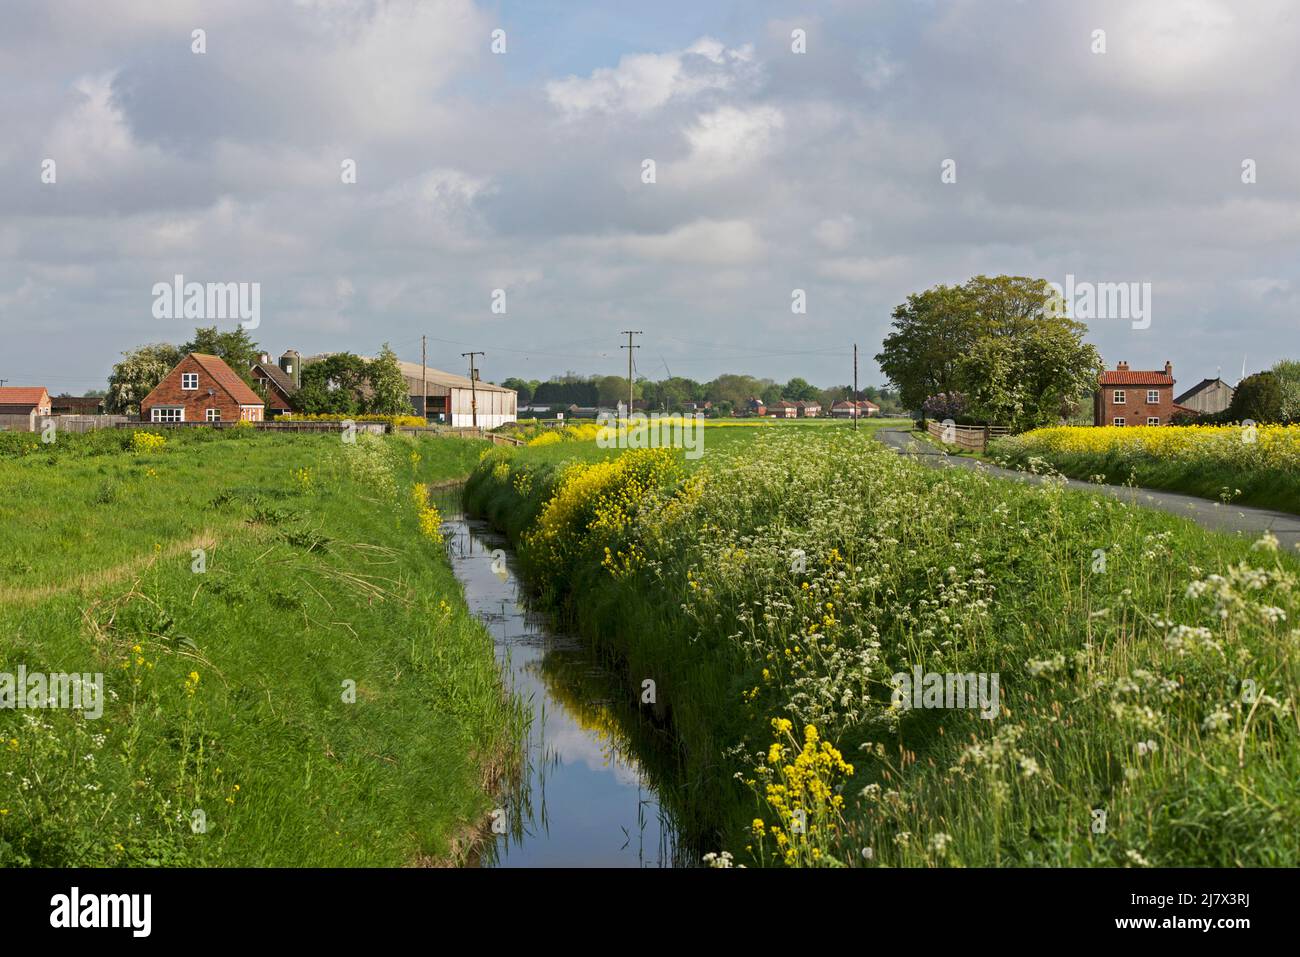 Typcal fasrming landscape near Reedness, East Yorkshire, England UK Stock Photo